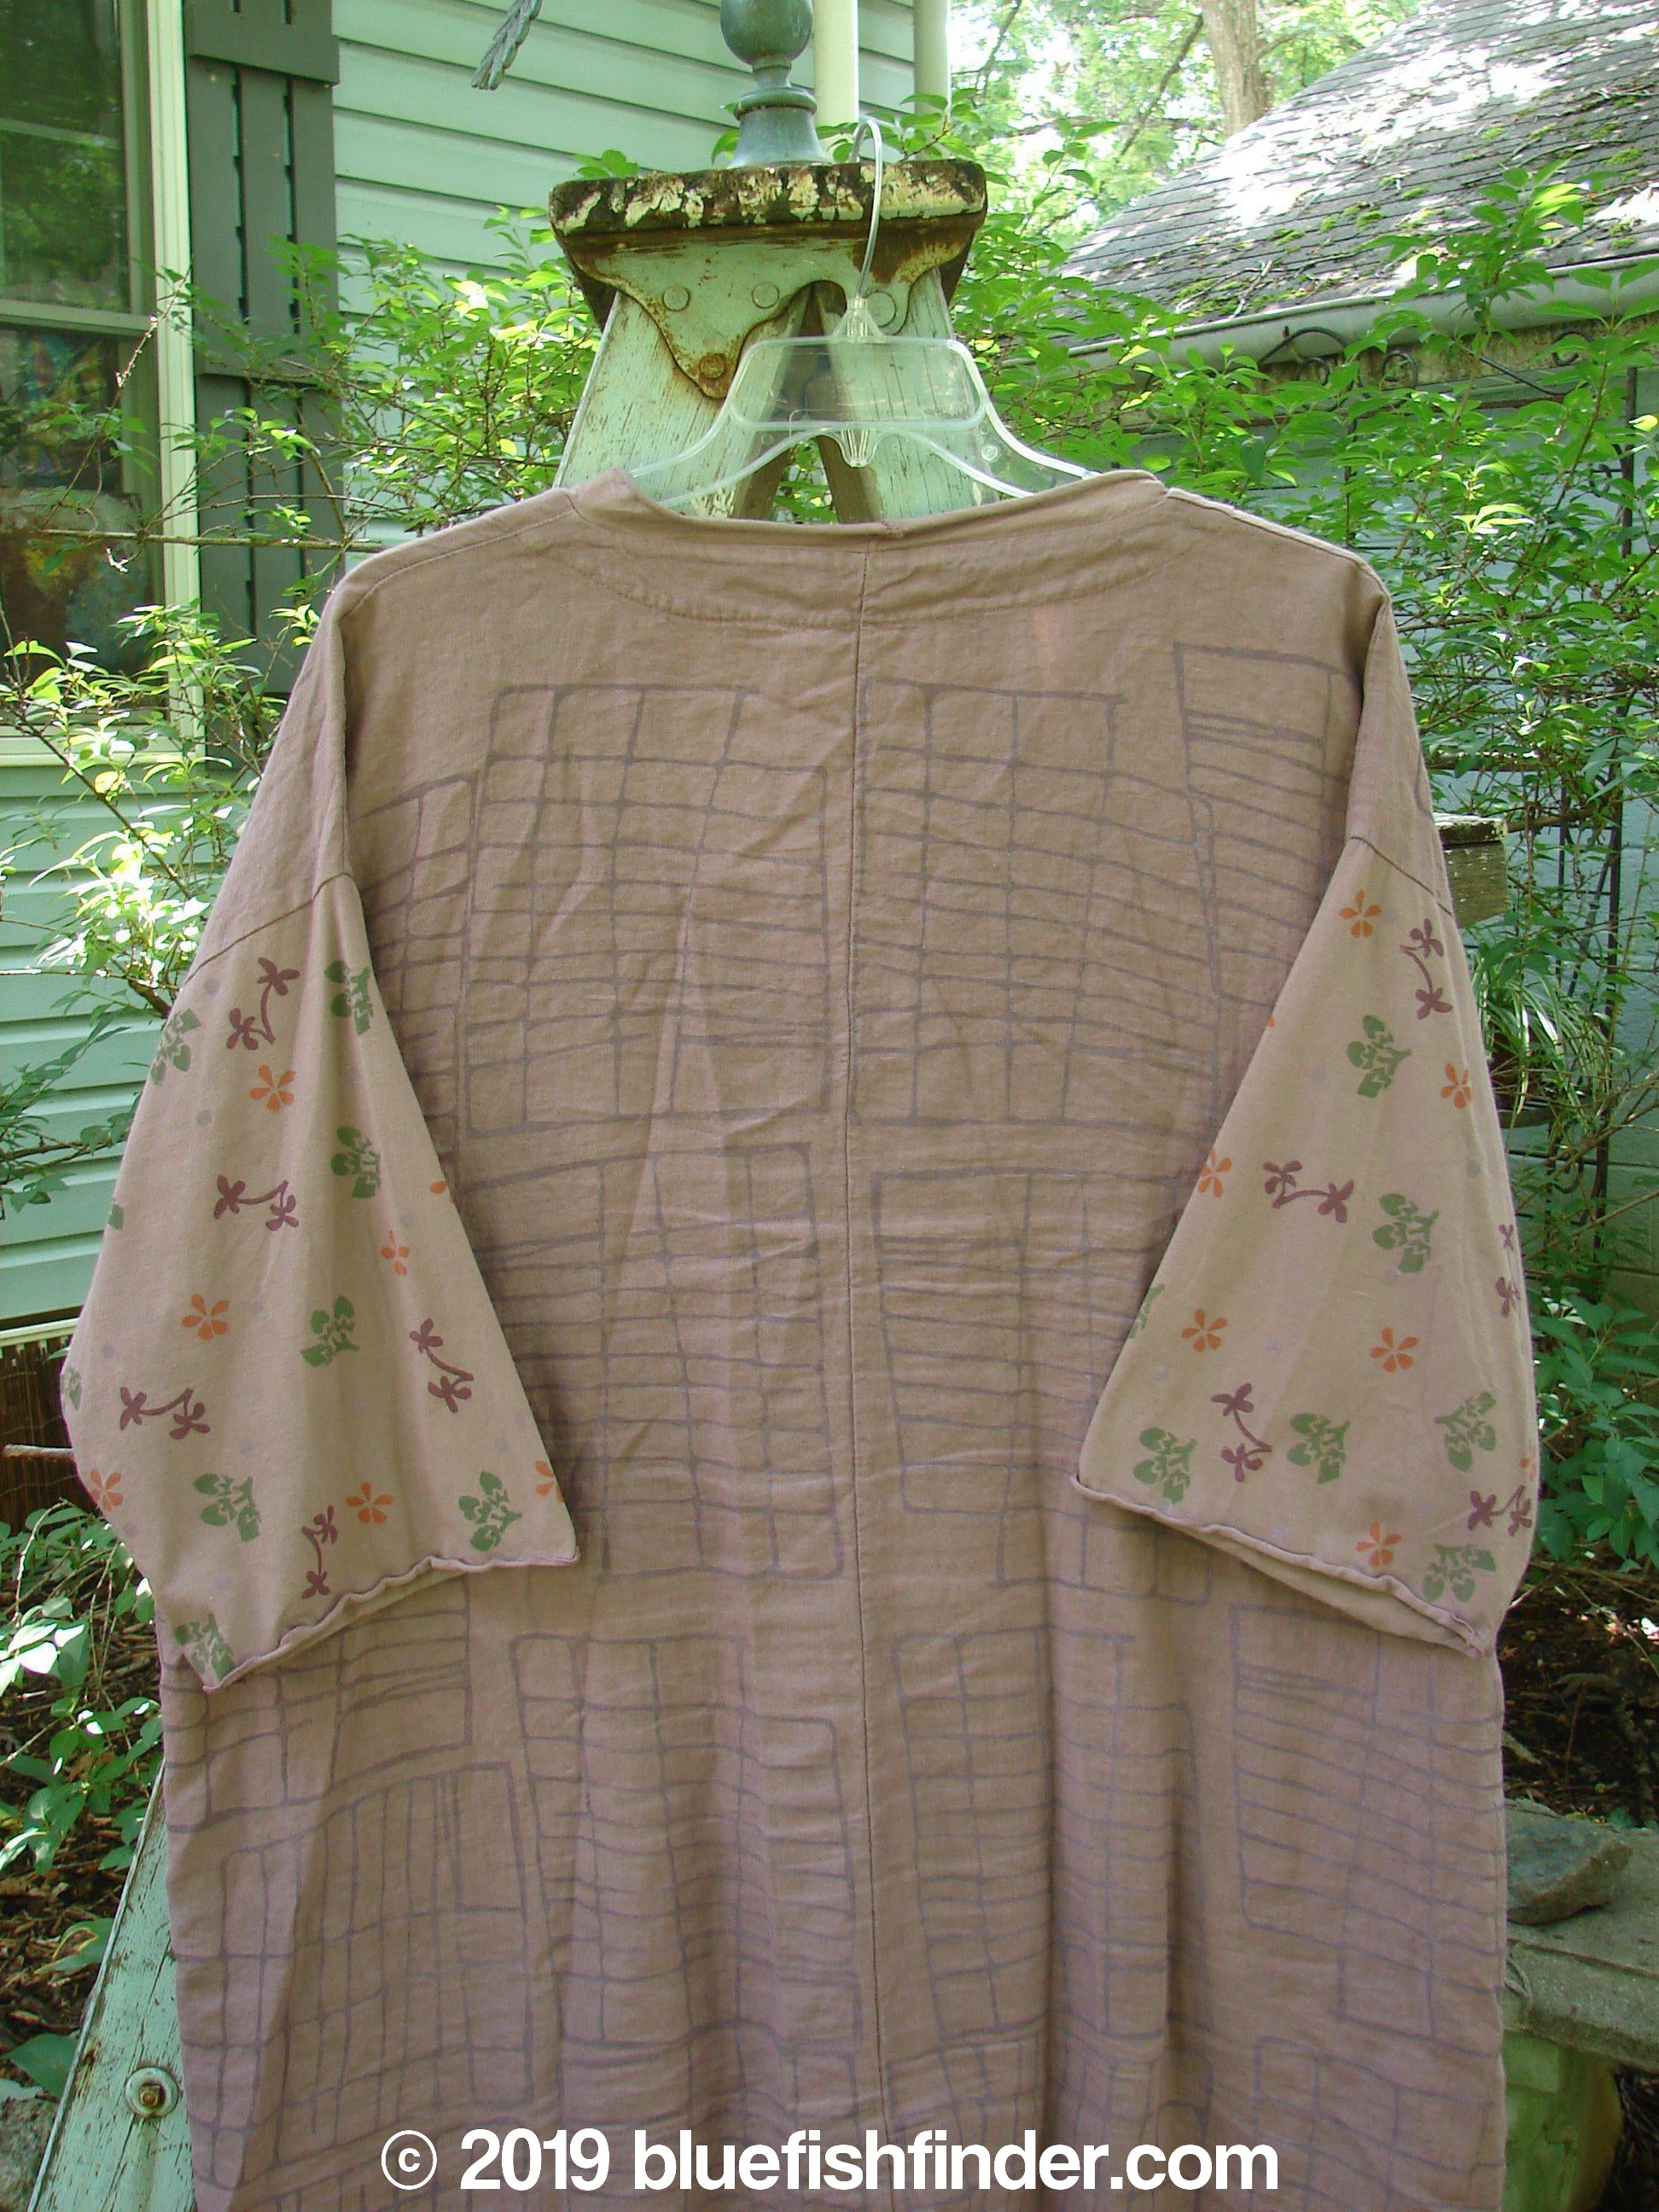 Image alt text: Barclay Linen Cotton Sleeve Pocket Cardigan in Rich Mauve, featuring a patterned shirt with wooden button curved front, drop shoulders, and organic cotton sleeves painted in a floral theme.